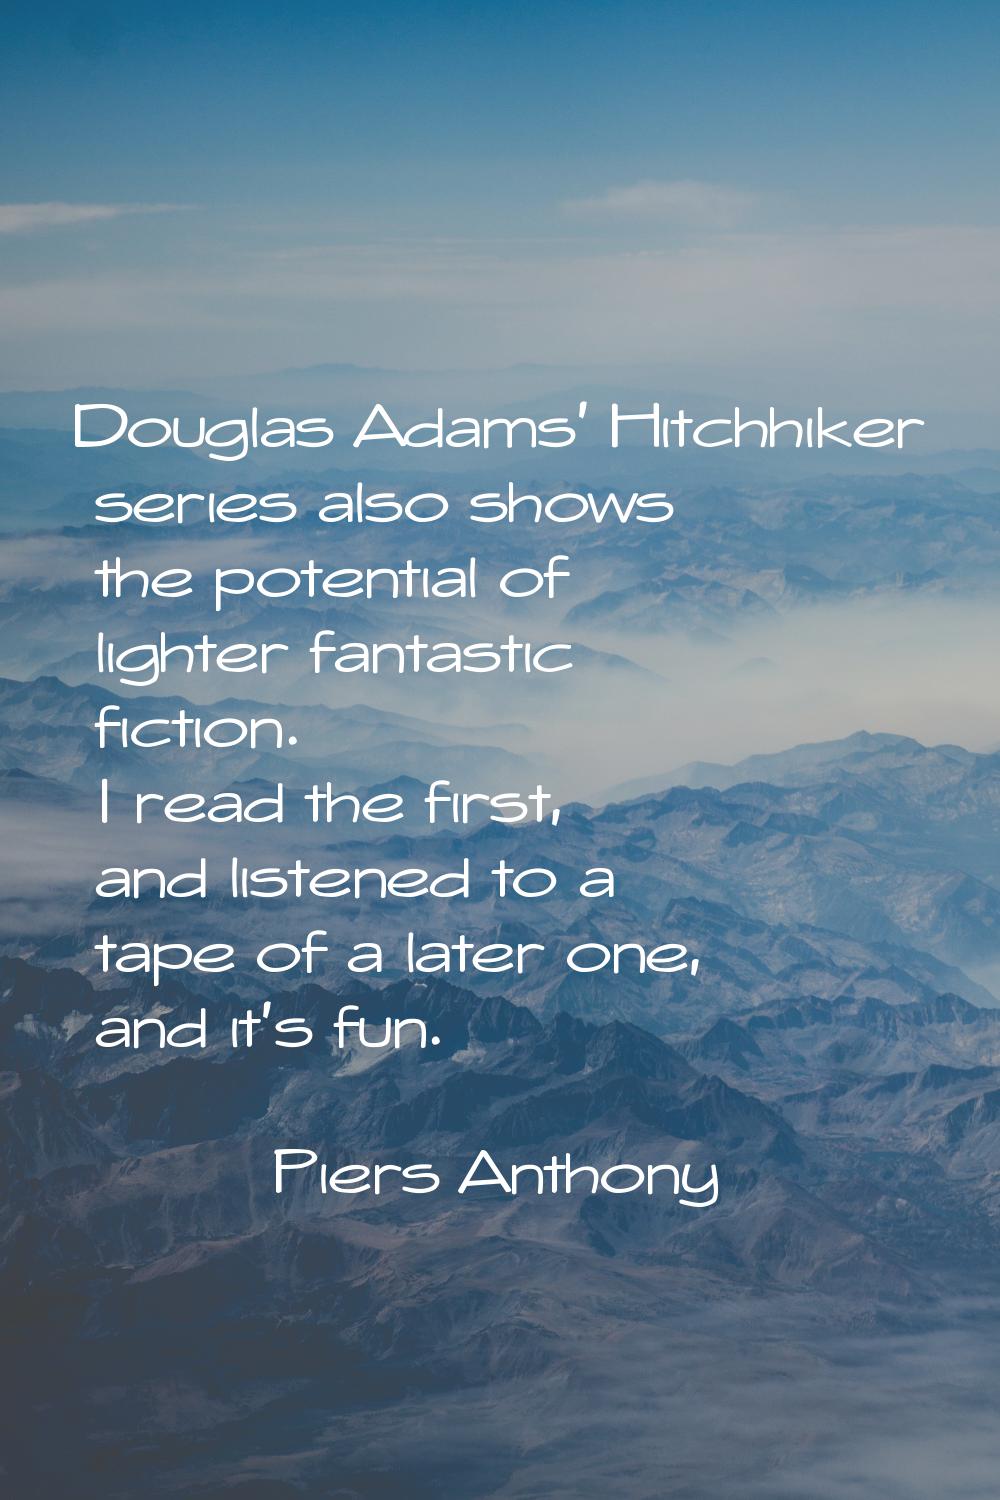 Douglas Adams' Hitchhiker series also shows the potential of lighter fantastic fiction. I read the 